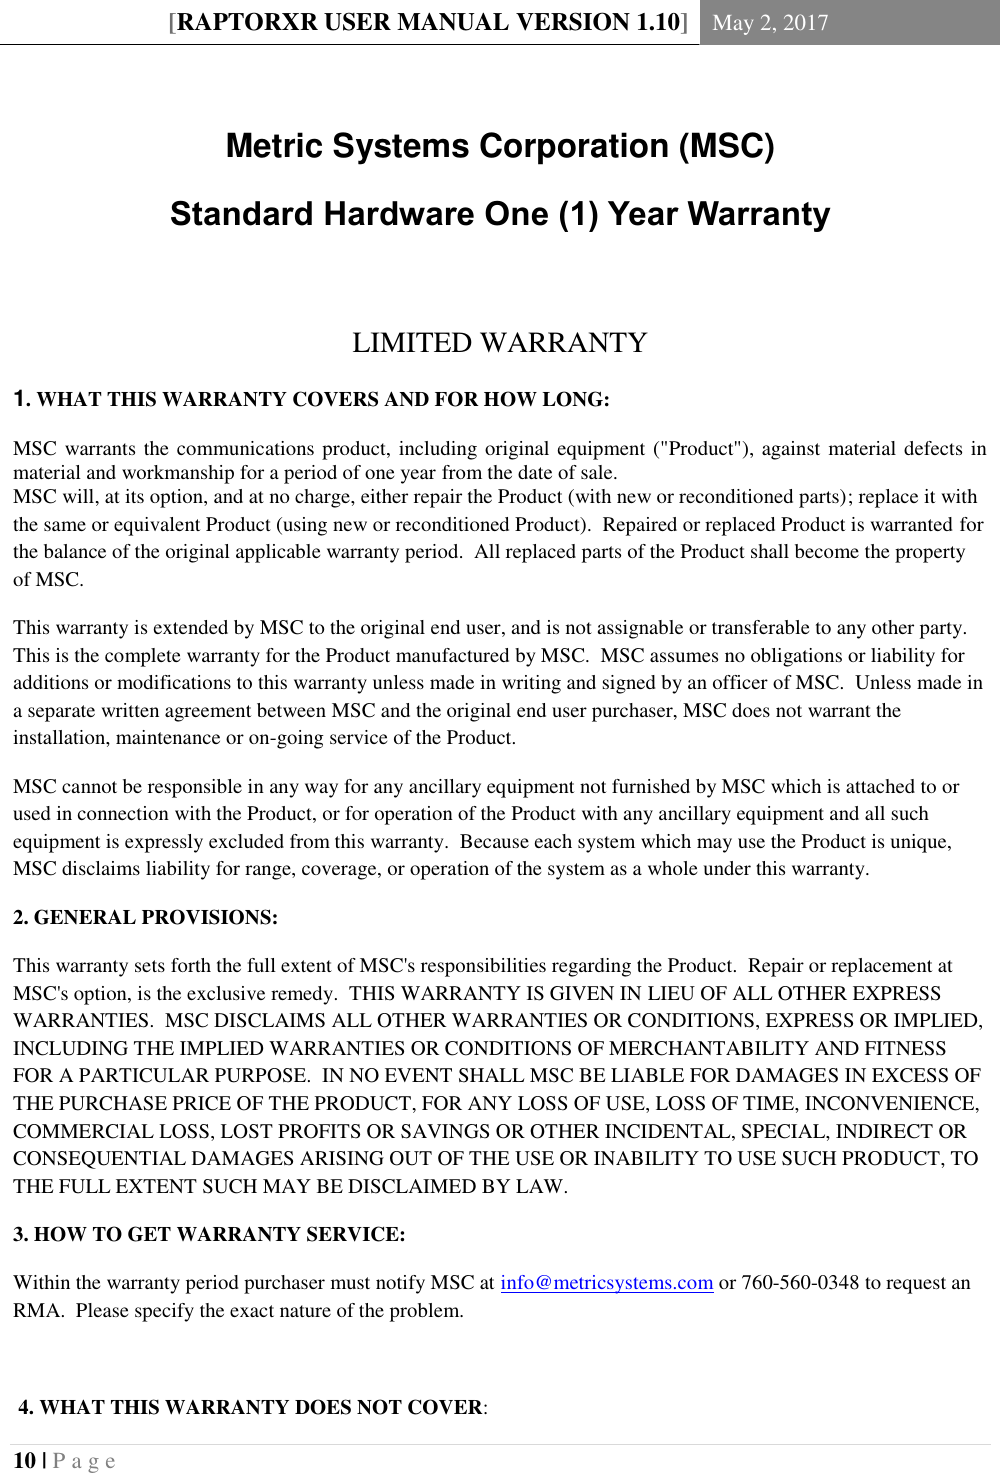 [RAPTORXR USER MANUAL VERSION 1.10] May 2, 2017  10 | P a g e    Metric Systems Corporation (MSC) Standard Hardware One (1) Year Warranty  LIMITED WARRANTY 1. WHAT THIS WARRANTY COVERS AND FOR HOW LONG: MSC warrants the communications product, including original equipment (&quot;Product&quot;), against material defects in material and workmanship for a period of one year from the date of sale. MSC will, at its option, and at no charge, either repair the Product (with new or reconditioned parts); replace it with the same or equivalent Product (using new or reconditioned Product).  Repaired or replaced Product is warranted for the balance of the original applicable warranty period.  All replaced parts of the Product shall become the property of MSC. This warranty is extended by MSC to the original end user, and is not assignable or transferable to any other party.  This is the complete warranty for the Product manufactured by MSC.  MSC assumes no obligations or liability for additions or modifications to this warranty unless made in writing and signed by an officer of MSC.  Unless made in a separate written agreement between MSC and the original end user purchaser, MSC does not warrant the installation, maintenance or on-going service of the Product. MSC cannot be responsible in any way for any ancillary equipment not furnished by MSC which is attached to or used in connection with the Product, or for operation of the Product with any ancillary equipment and all such equipment is expressly excluded from this warranty.  Because each system which may use the Product is unique, MSC disclaims liability for range, coverage, or operation of the system as a whole under this warranty. 2. GENERAL PROVISIONS: This warranty sets forth the full extent of MSC&apos;s responsibilities regarding the Product.  Repair or replacement at MSC&apos;s option, is the exclusive remedy.  THIS WARRANTY IS GIVEN IN LIEU OF ALL OTHER EXPRESS WARRANTIES.  MSC DISCLAIMS ALL OTHER WARRANTIES OR CONDITIONS, EXPRESS OR IMPLIED, INCLUDING THE IMPLIED WARRANTIES OR CONDITIONS OF MERCHANTABILITY AND FITNESS FOR A PARTICULAR PURPOSE.  IN NO EVENT SHALL MSC BE LIABLE FOR DAMAGES IN EXCESS OF THE PURCHASE PRICE OF THE PRODUCT, FOR ANY LOSS OF USE, LOSS OF TIME, INCONVENIENCE, COMMERCIAL LOSS, LOST PROFITS OR SAVINGS OR OTHER INCIDENTAL, SPECIAL, INDIRECT OR CONSEQUENTIAL DAMAGES ARISING OUT OF THE USE OR INABILITY TO USE SUCH PRODUCT, TO THE FULL EXTENT SUCH MAY BE DISCLAIMED BY LAW. 3. HOW TO GET WARRANTY SERVICE: Within the warranty period purchaser must notify MSC at info@metricsystems.com or 760-560-0348 to request an RMA.  Please specify the exact nature of the problem.   4. WHAT THIS WARRANTY DOES NOT COVER: 